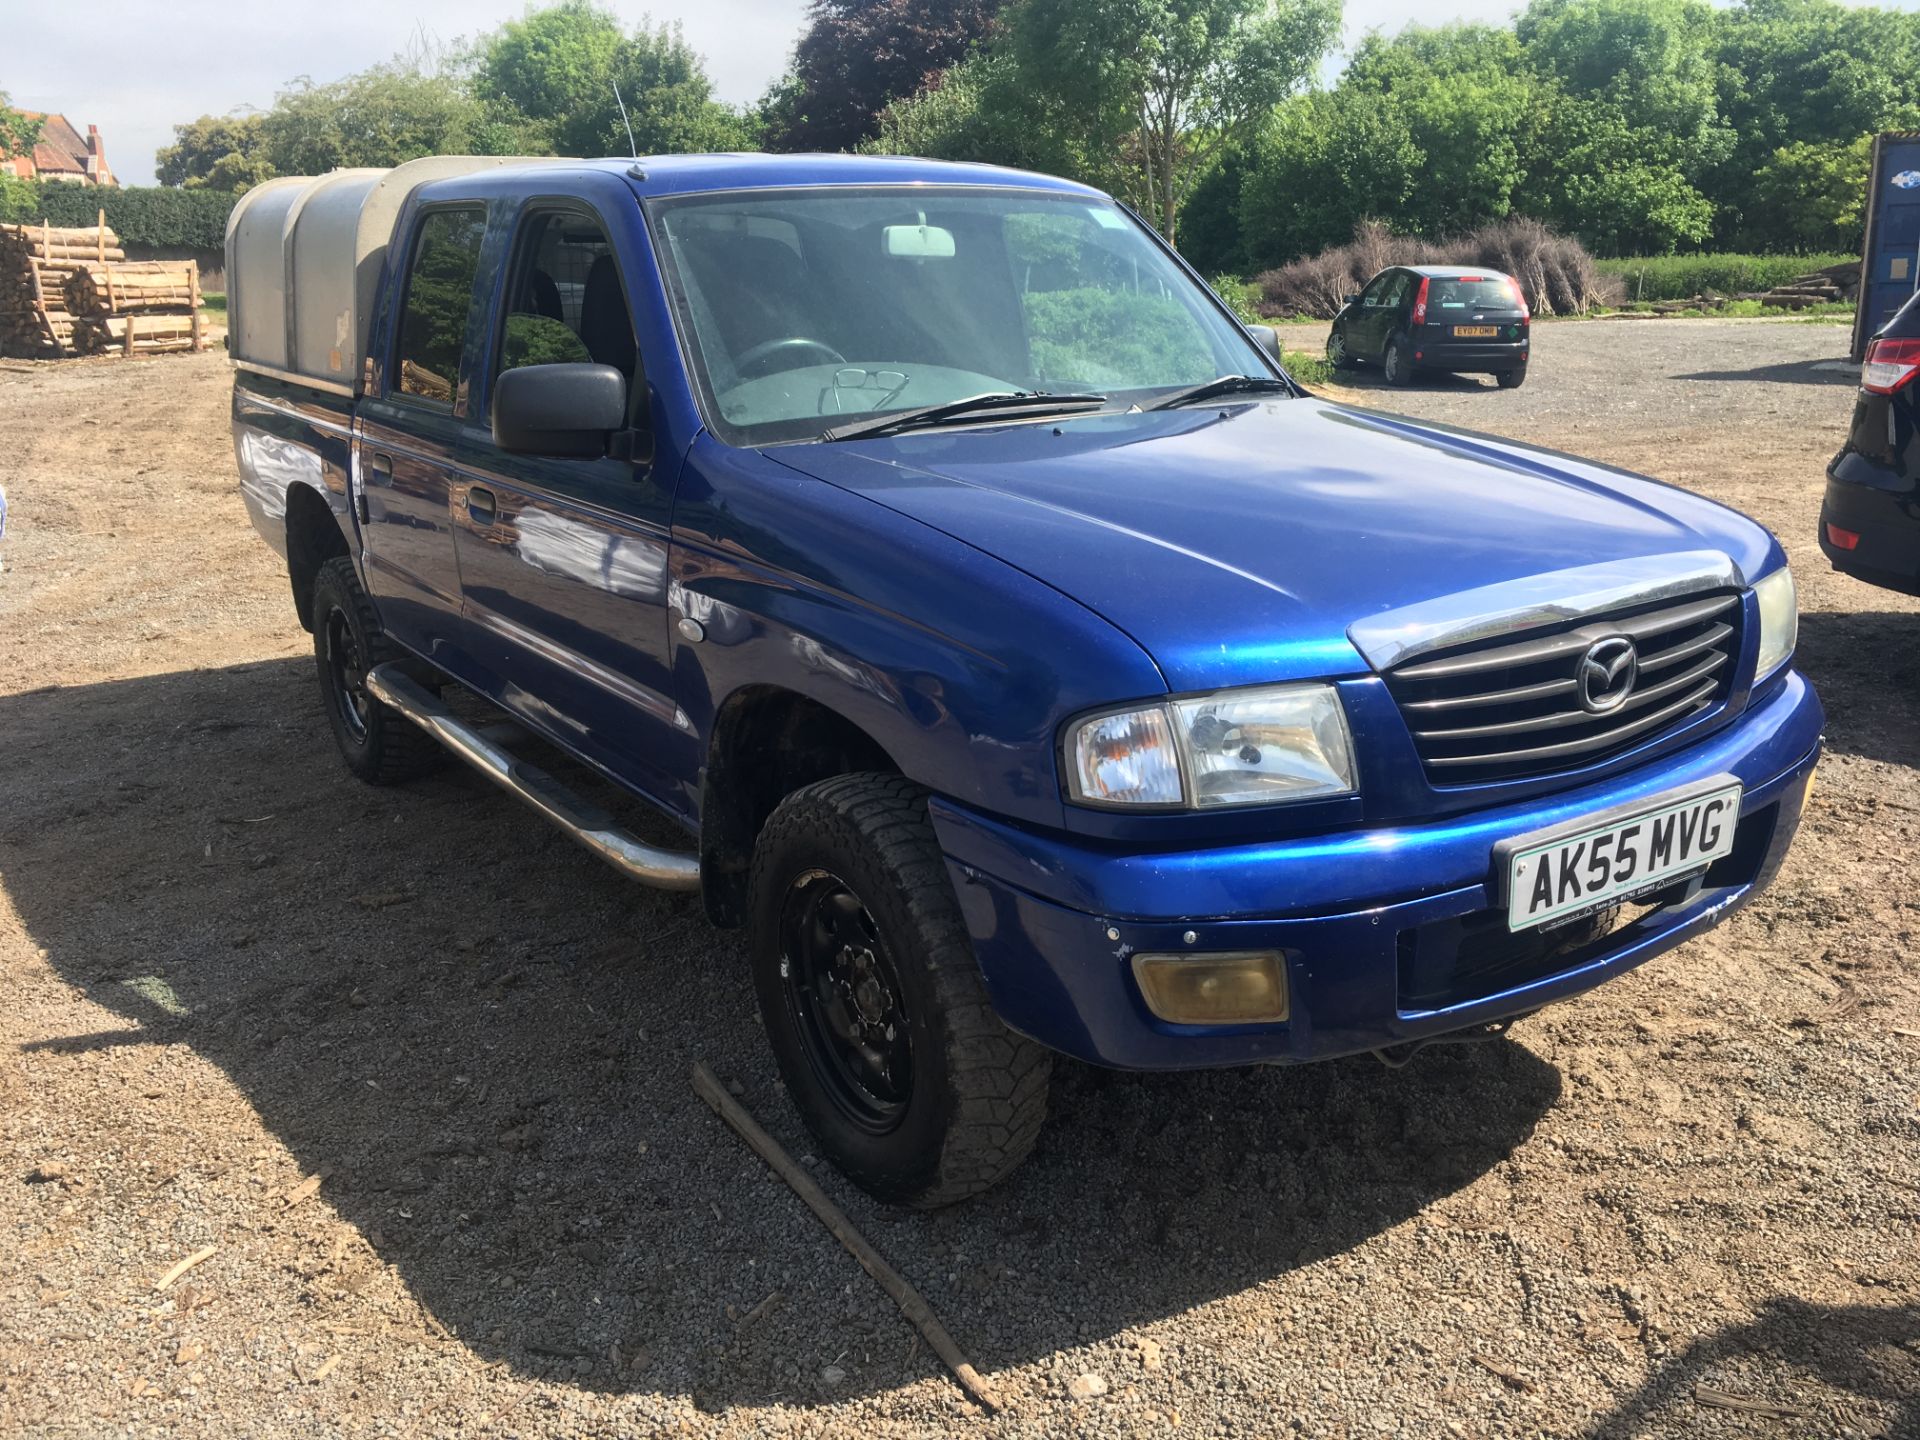 Mazda B2500TD 4X4 double cab pick-up truck, Date of Registration: 29.8.2005, Registration No: AK55